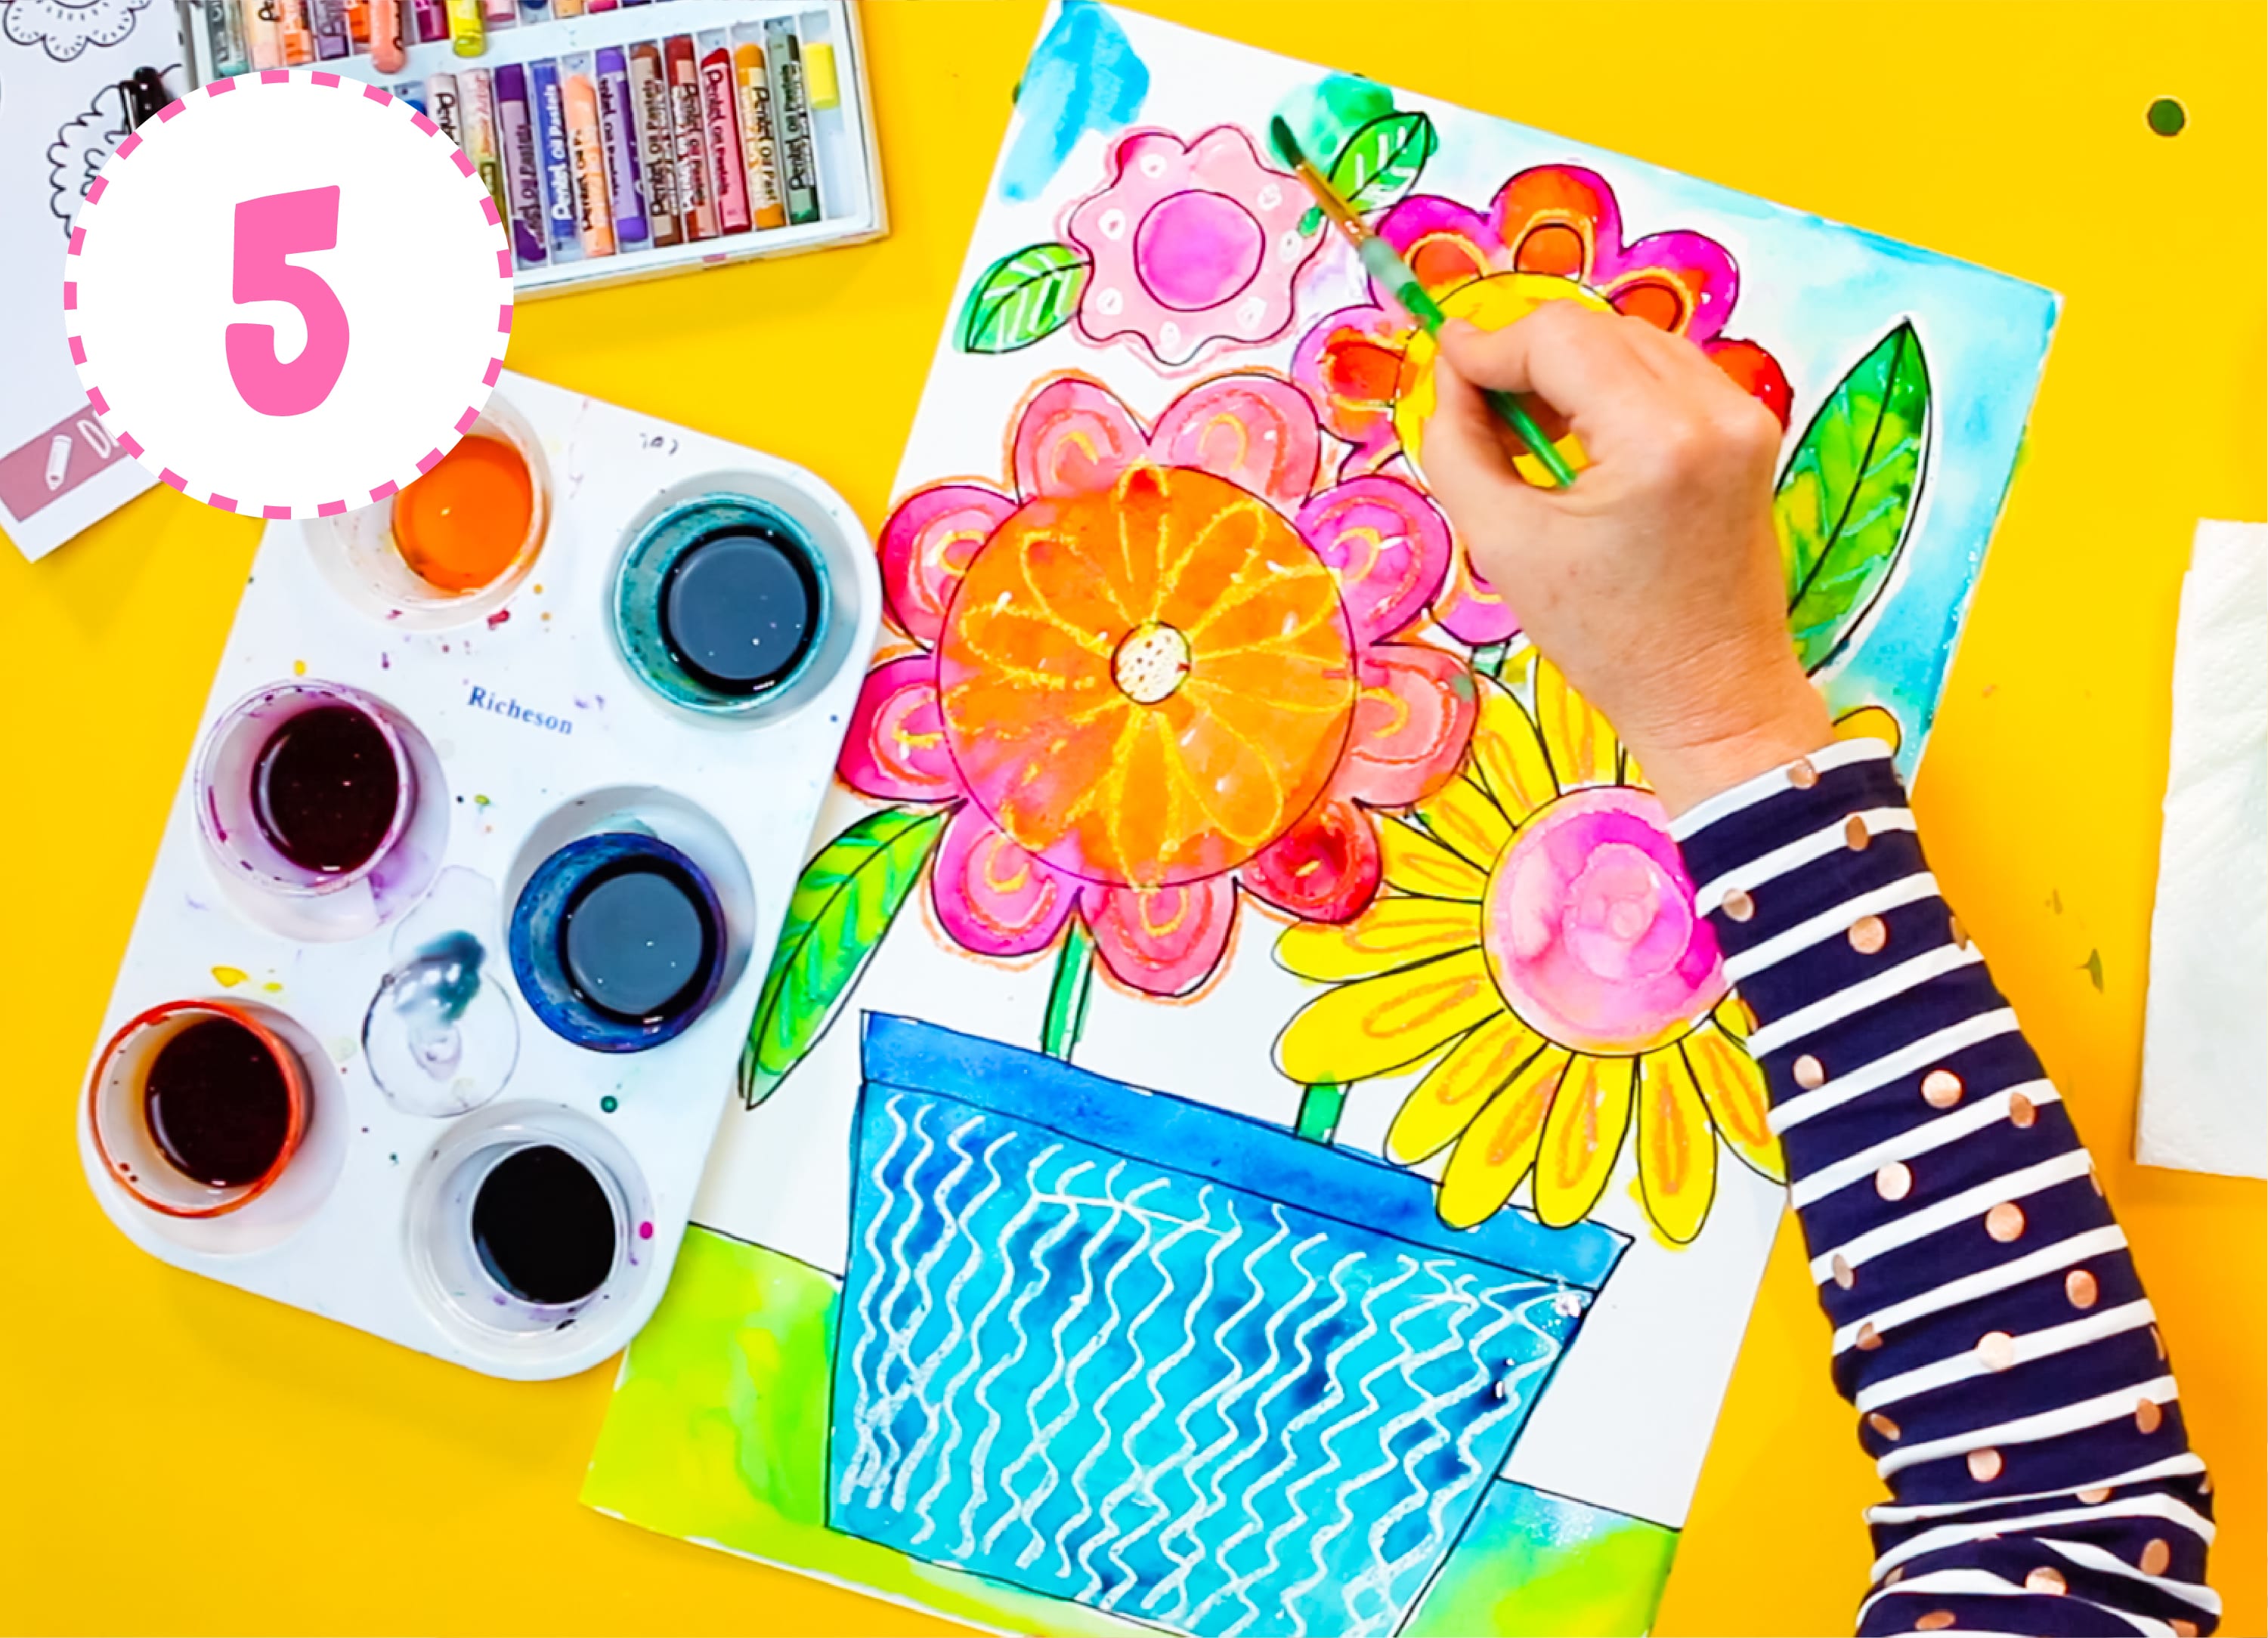 how to make your own watercolor resist flowers spingtime art projects for kids